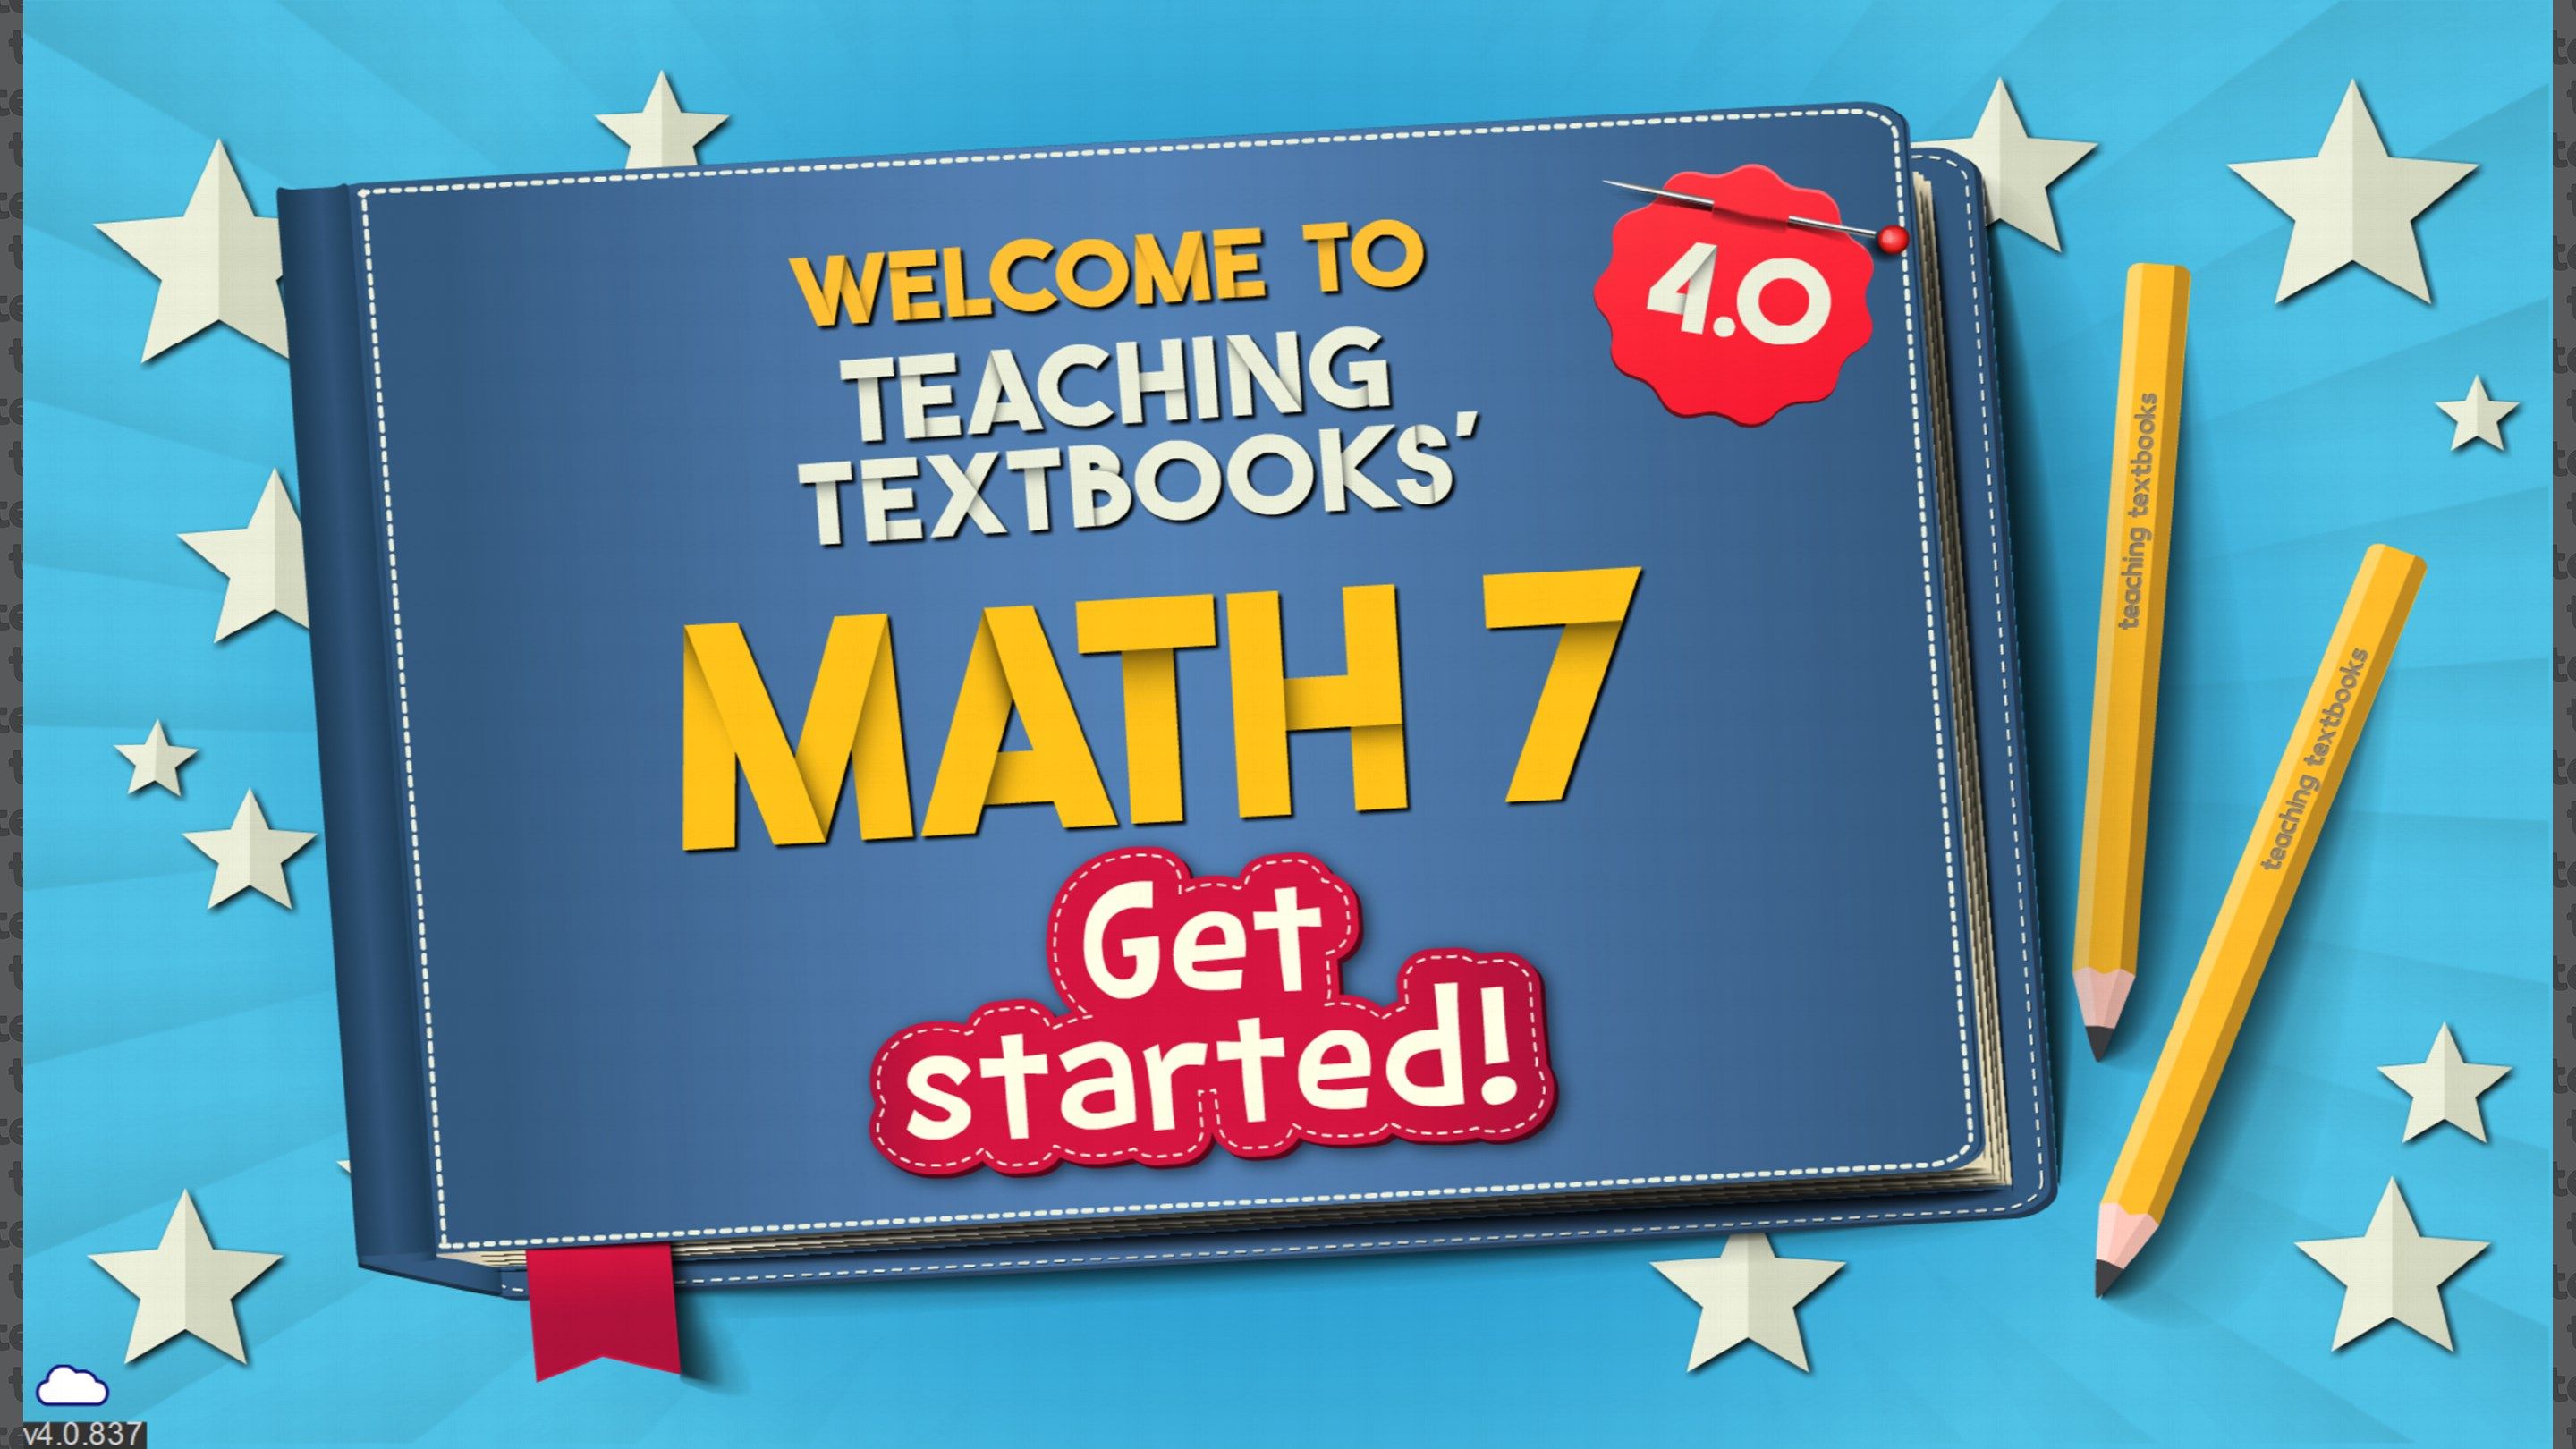 When the app launches, all you have to do to get started is log in with your Teaching Textbooks parent account, and it will connect to your Math 7 enrollment.